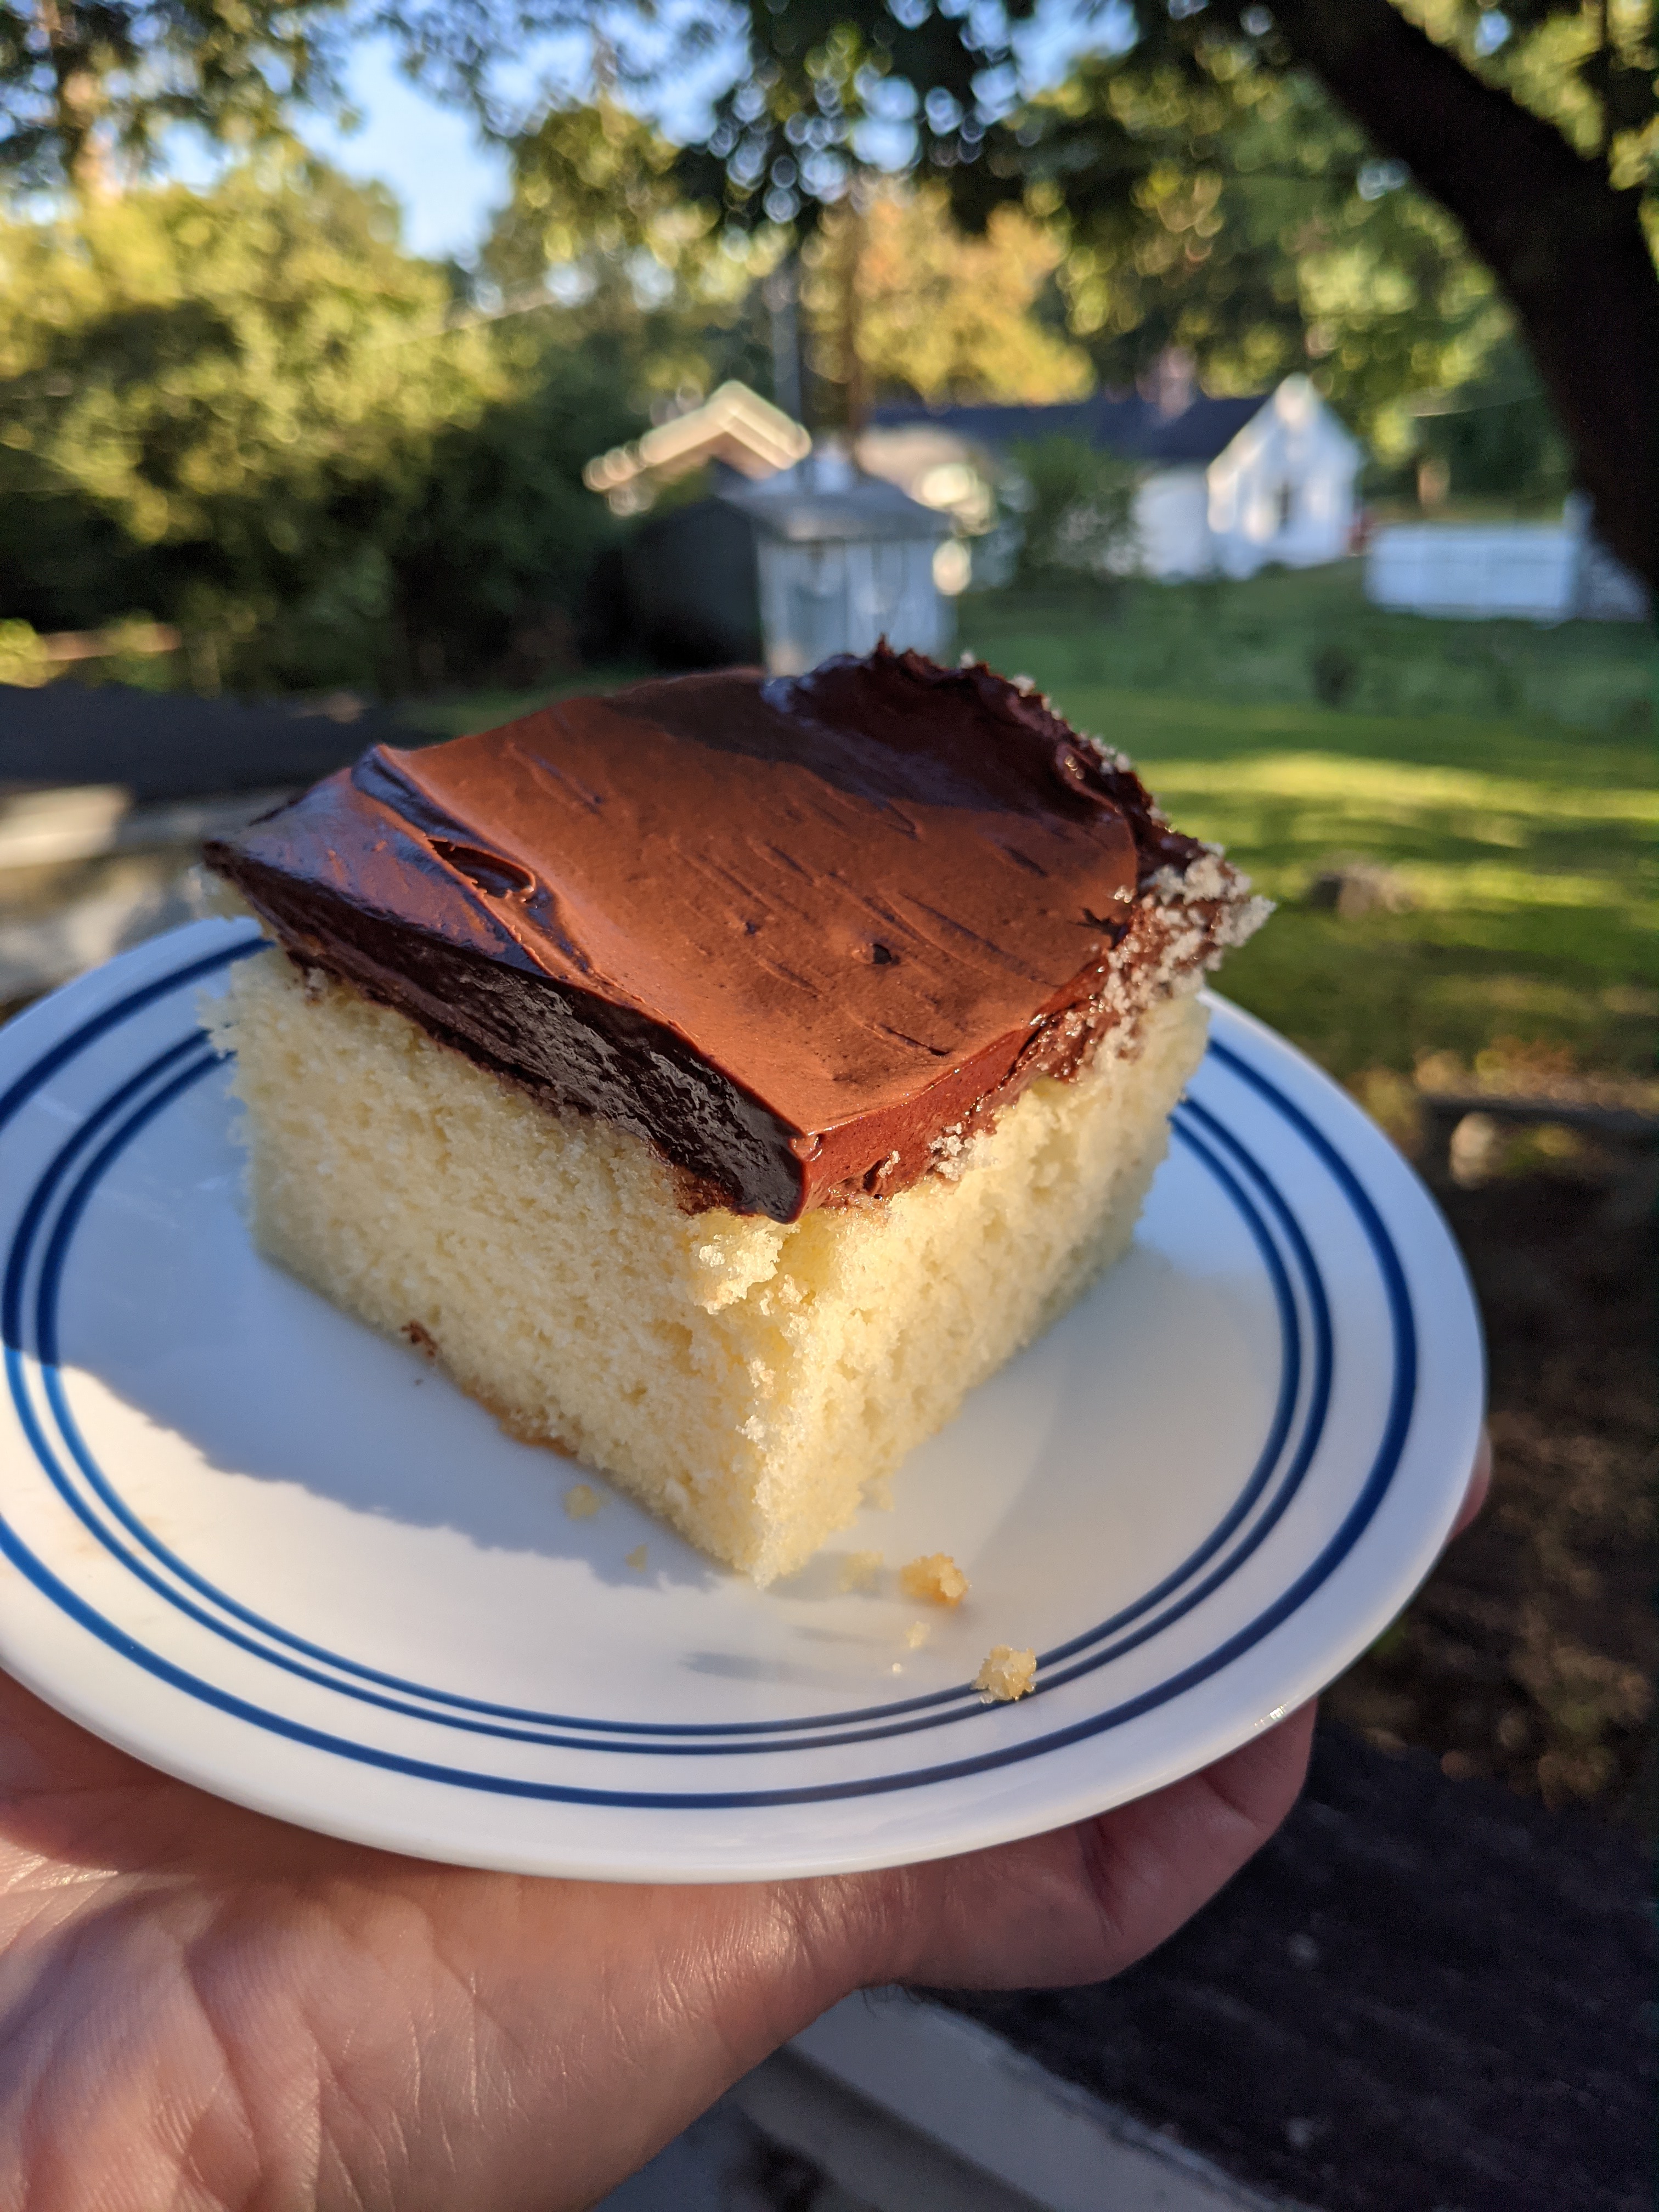 A slice of yellow sheet cake with chocolate frosting